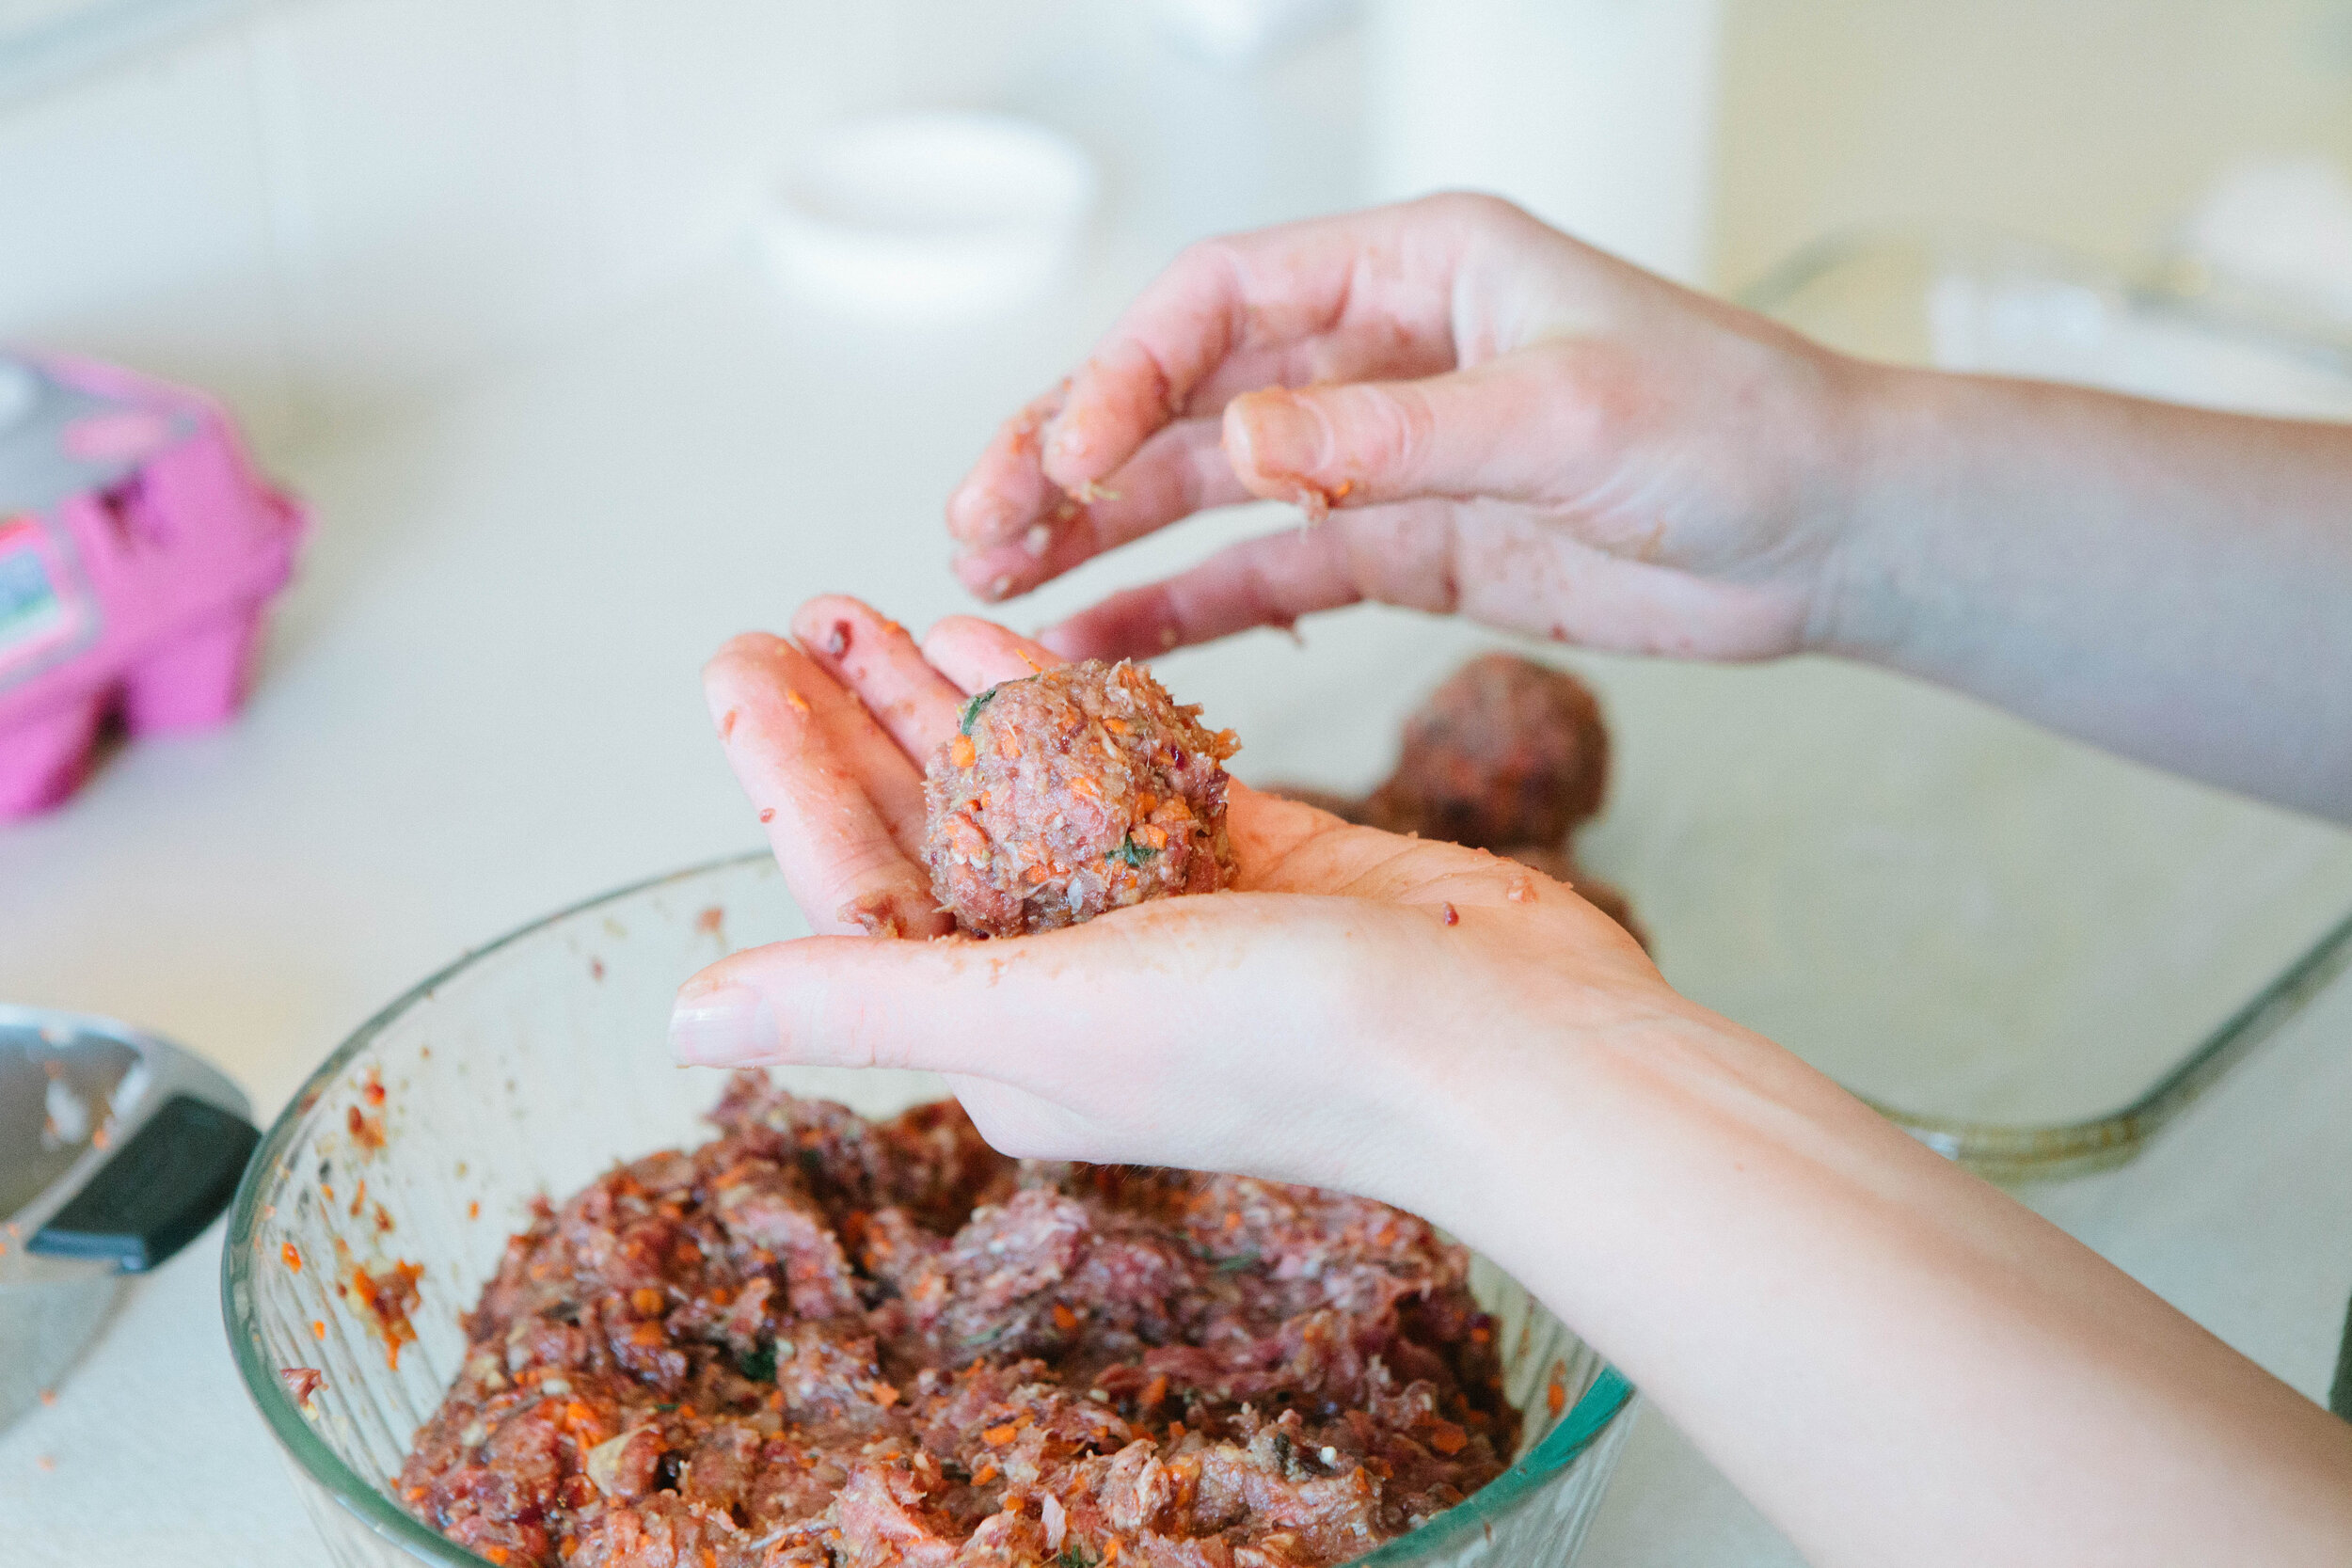 Liver meatballs are an easy way to get organ meats into your diet. This recipe makes a lot of meatballs and they’re easy to take a few out of the time out of the freezer to feed your family. See more ideas for how to meal prep on the GAPS Diet. Reci…